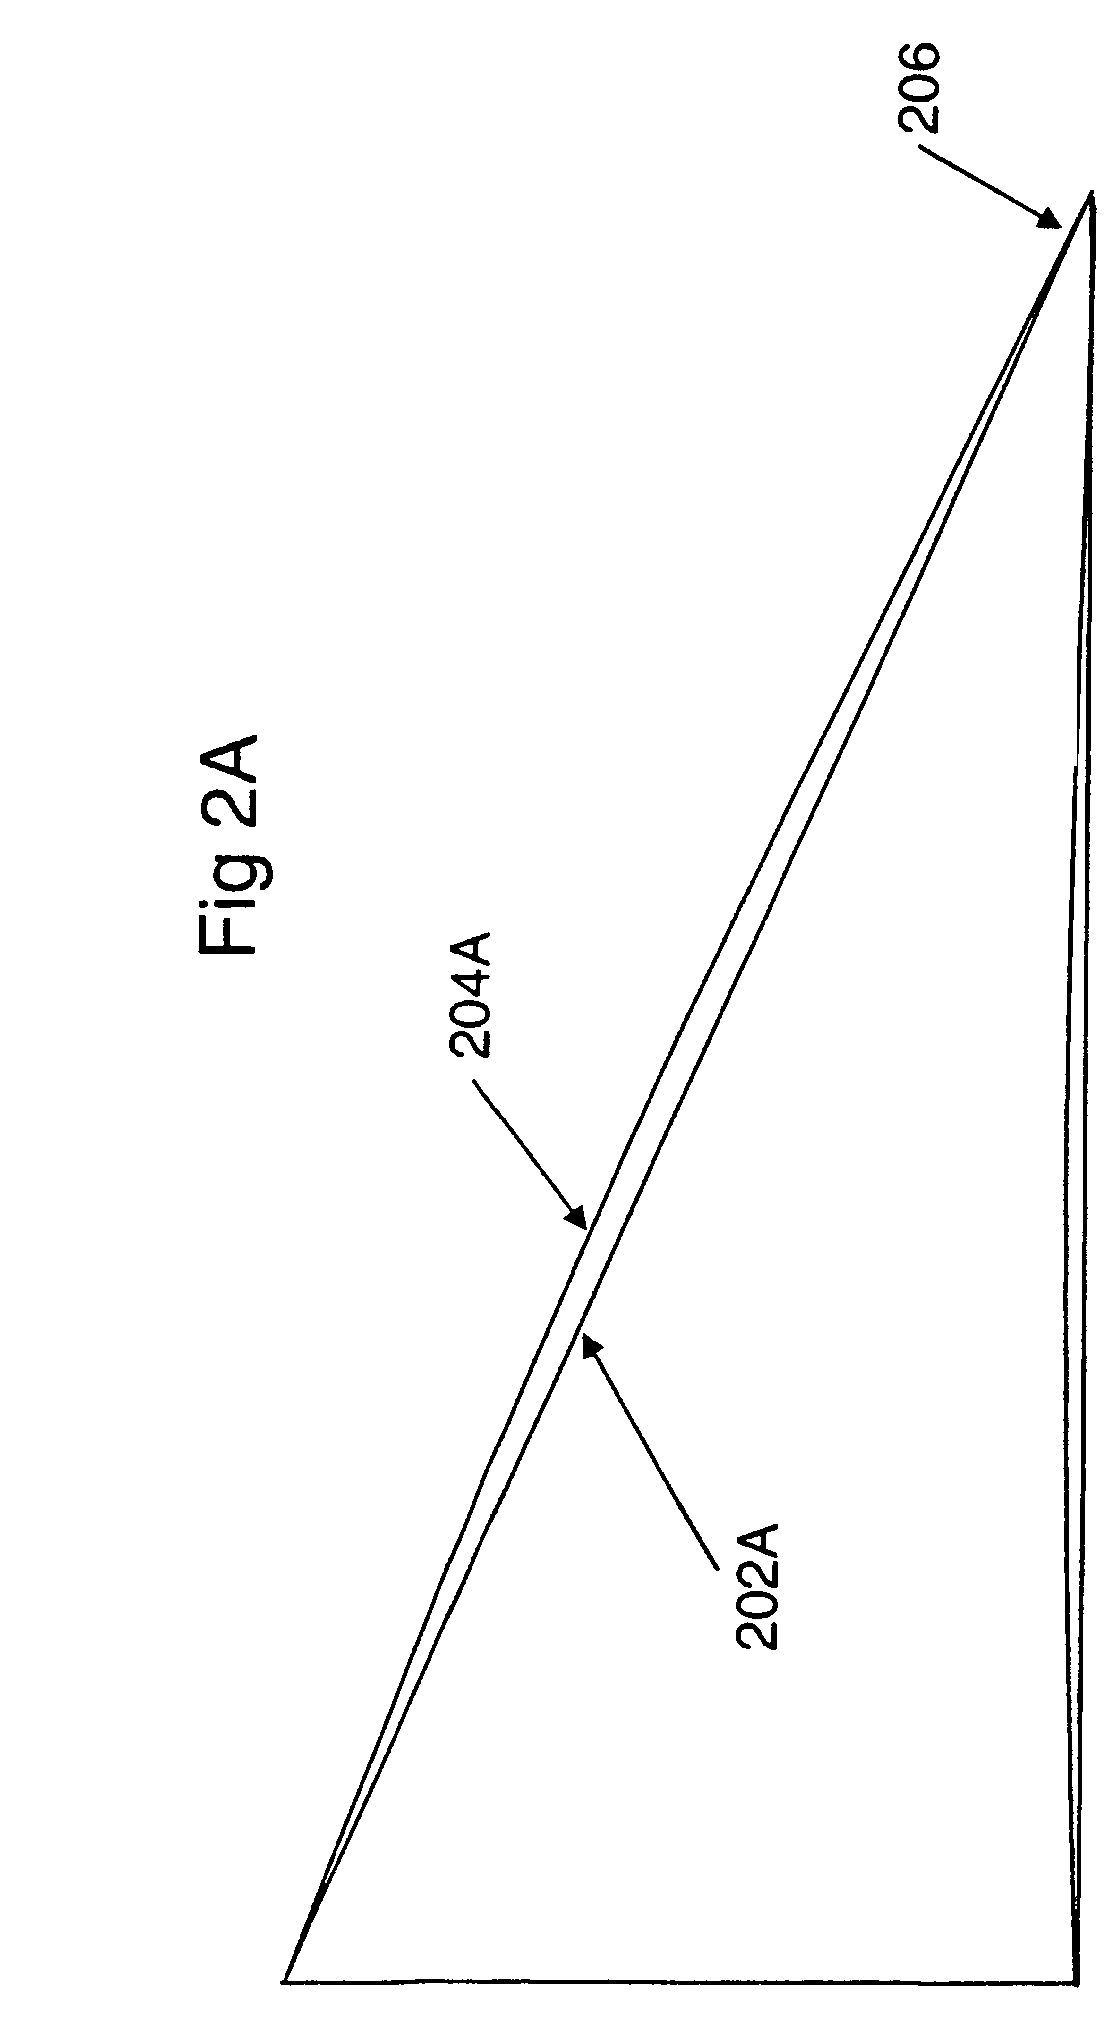 Single PZT actuator for effecting rotation of head suspension loads